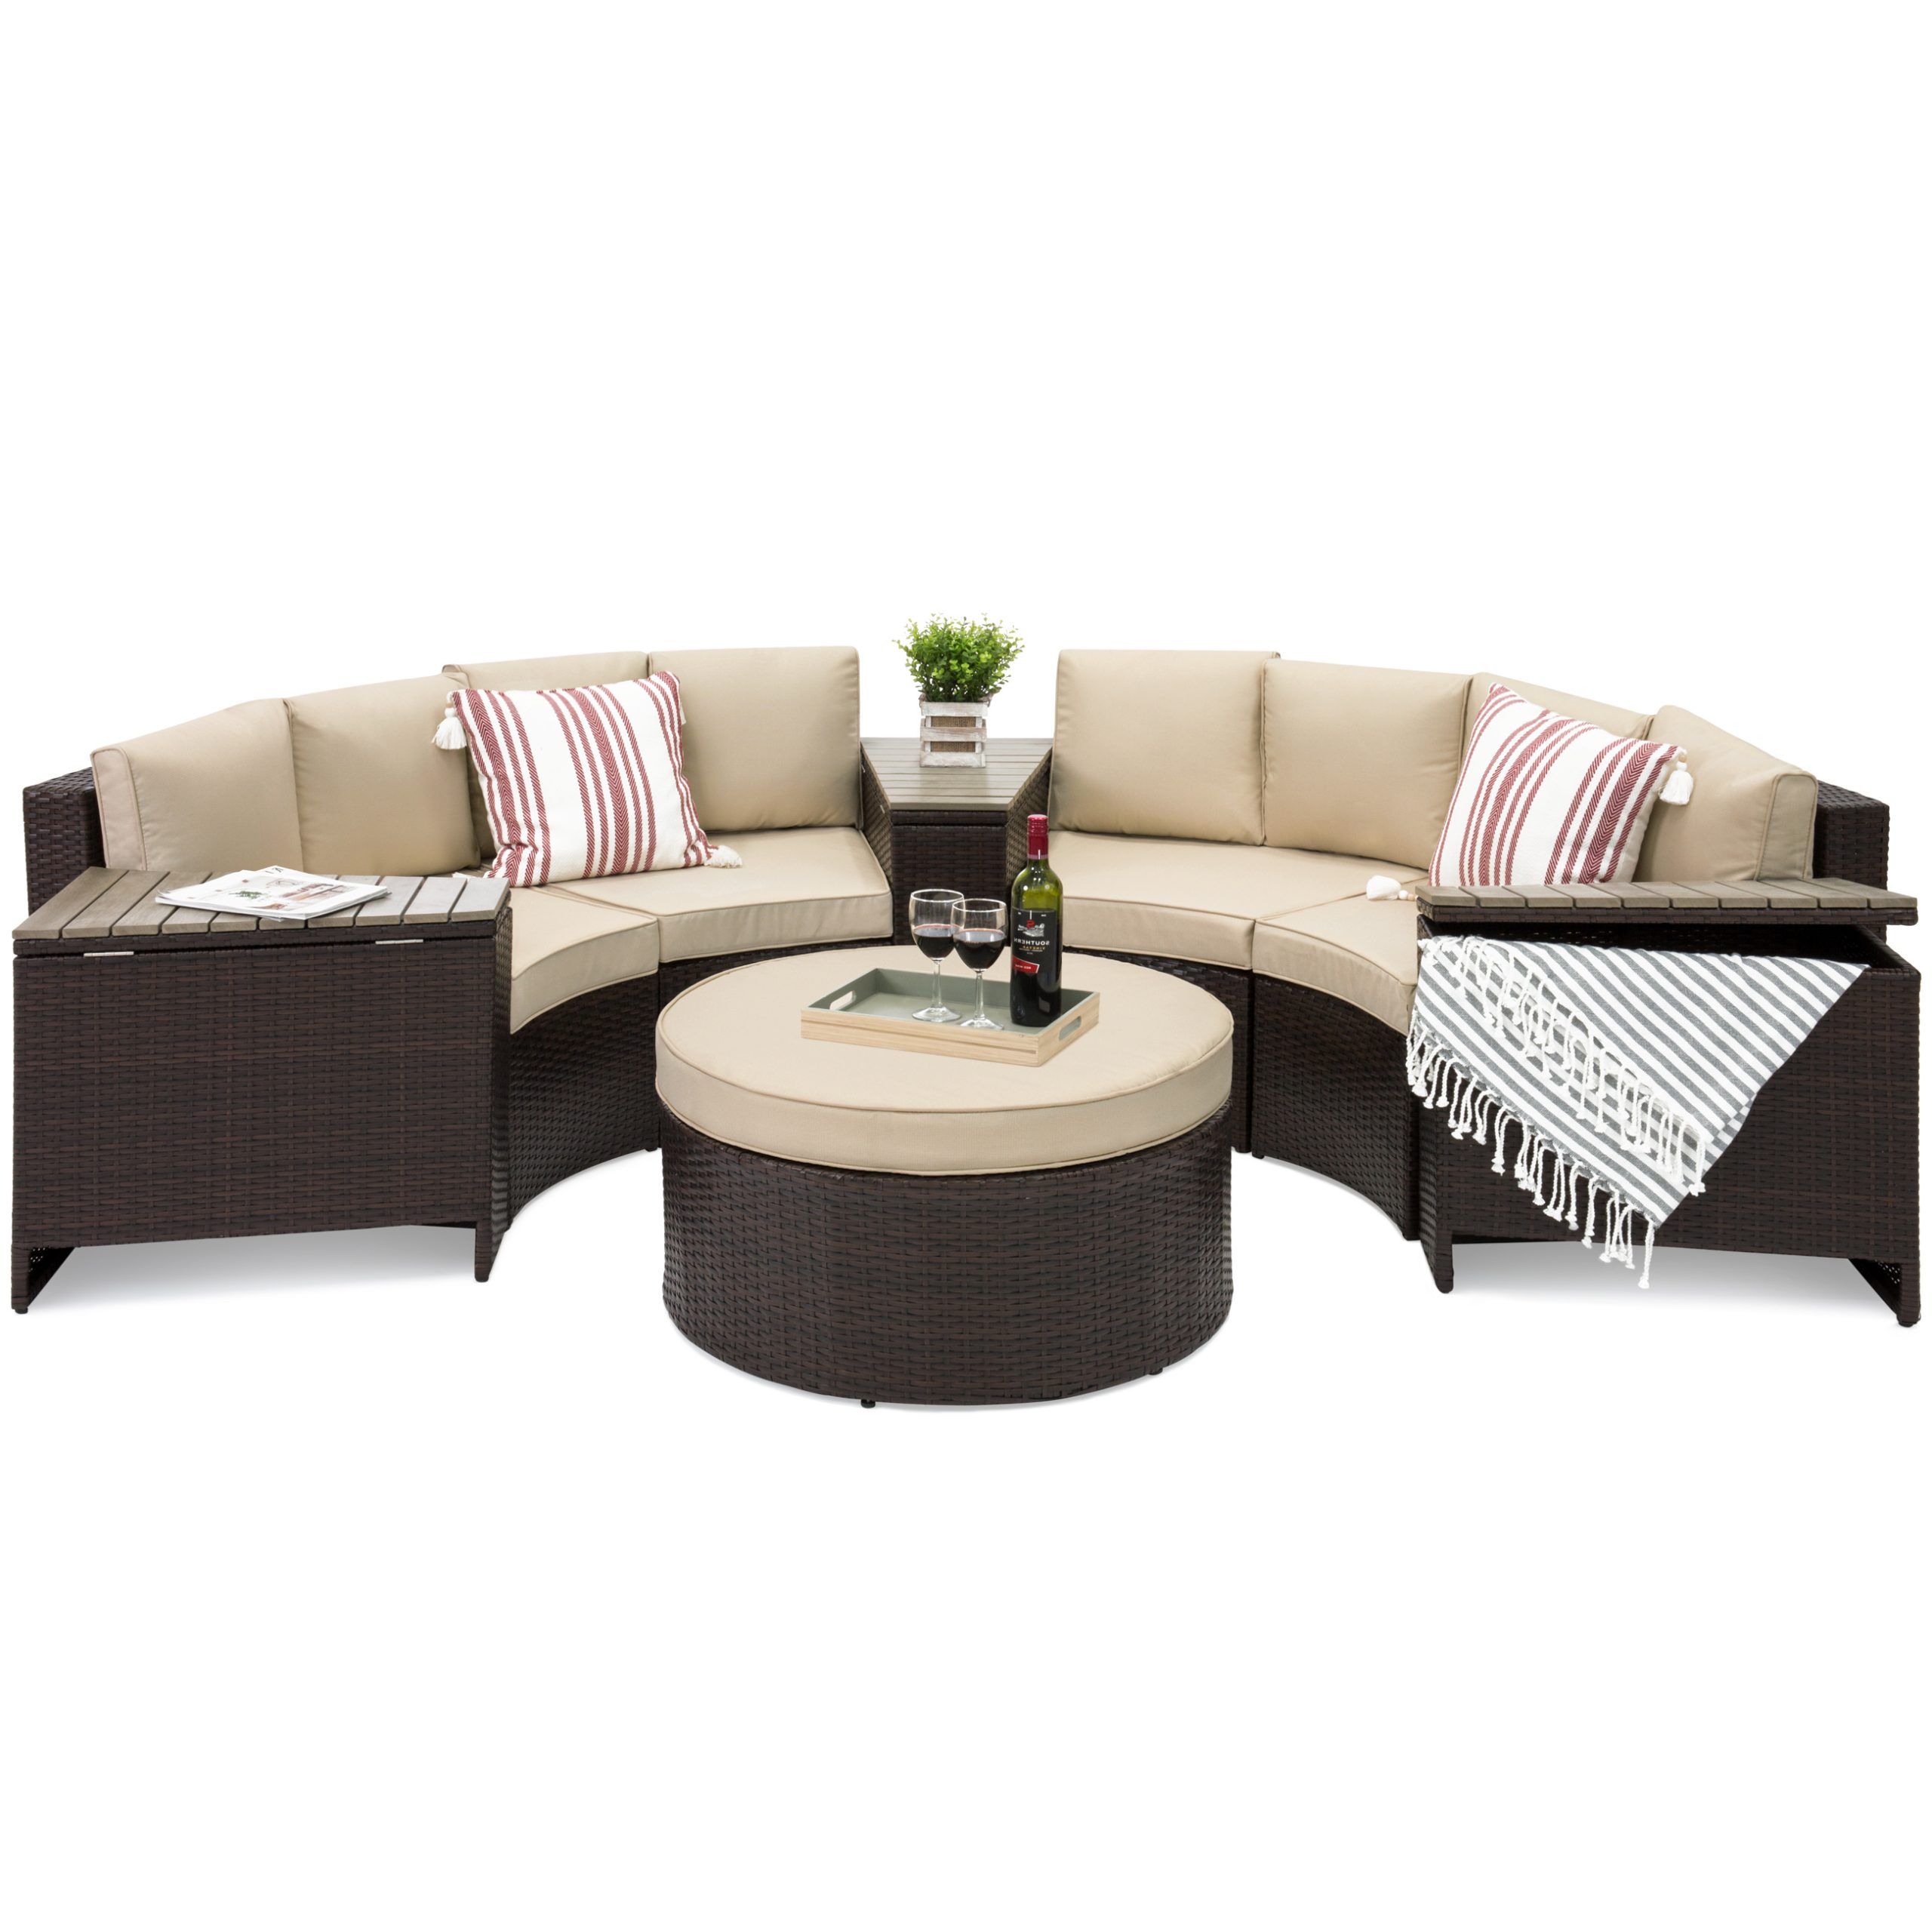 Most Recently Released Best Choice Products 8 Piece Half Circle Wicker Sectional Sofa Set W/  Waterproof Cushions, Wedge Storage Tables – Brown With Regard To Outdoor Wicker Plastic Half Moon Leaf Shape Porch Swings (View 14 of 25)